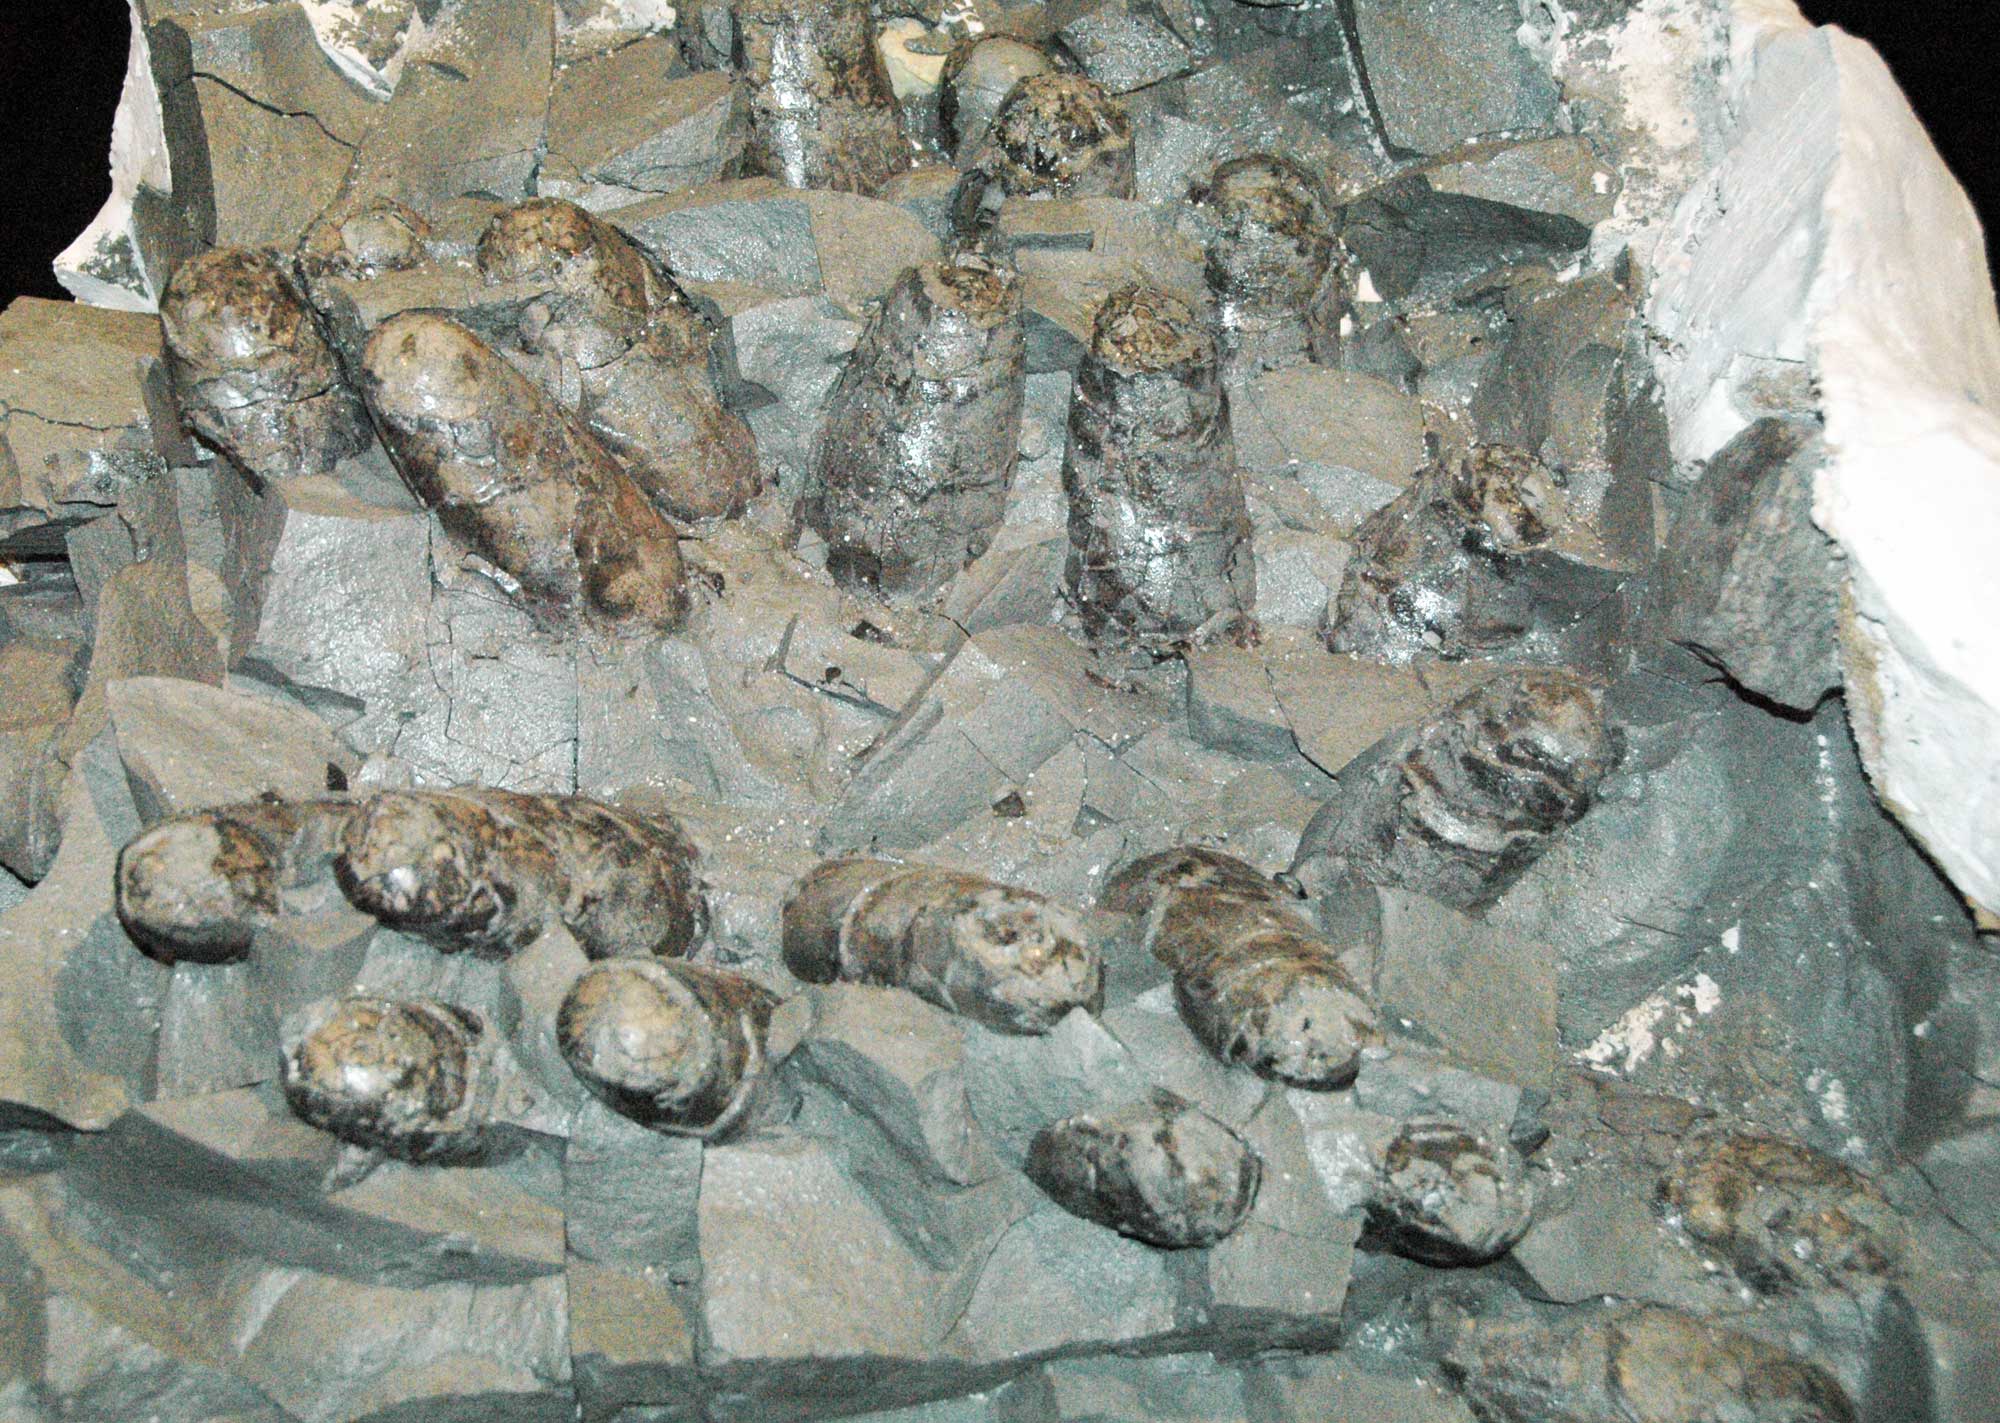 Photograph of Troodon eggs in rock matrix. The photo shows about twenty brown, oblong eggs preserved in gray matrix. Part of a white plaster cast can be seen near the upper left corner.